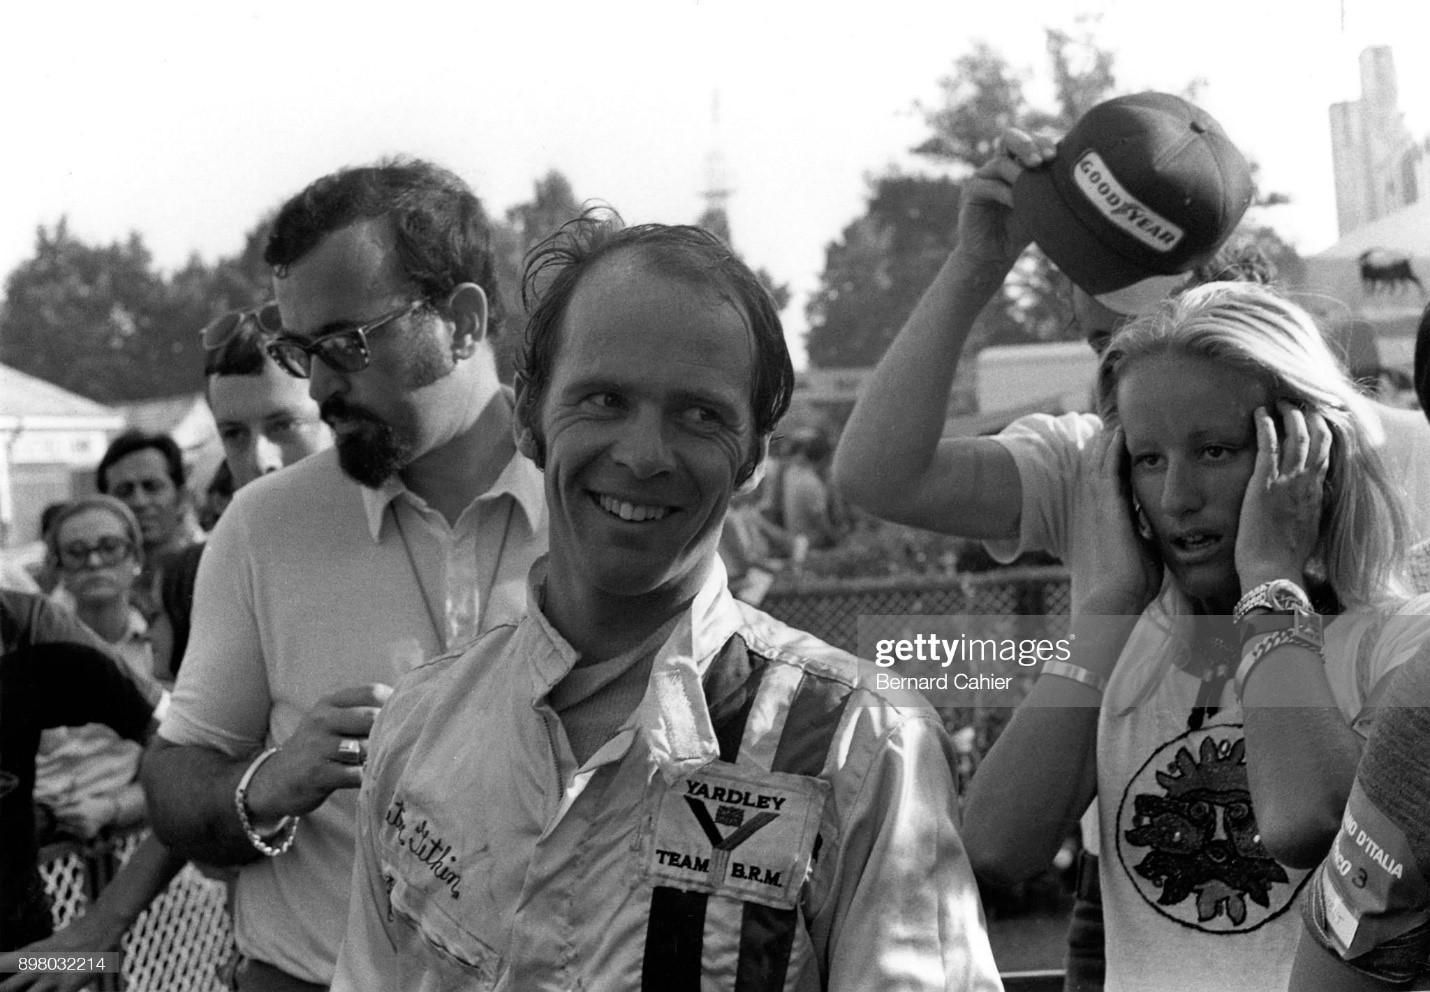 Peter Gethin, BRM P160, is all smiles after his victory in the Italian Grand Prix in Monza on 05 September 1971, in the closest finish in Formula One history, as Gethin beat Ronnie Peterson by 0.01 seconds with the top five covered by just 0.61 seconds. 